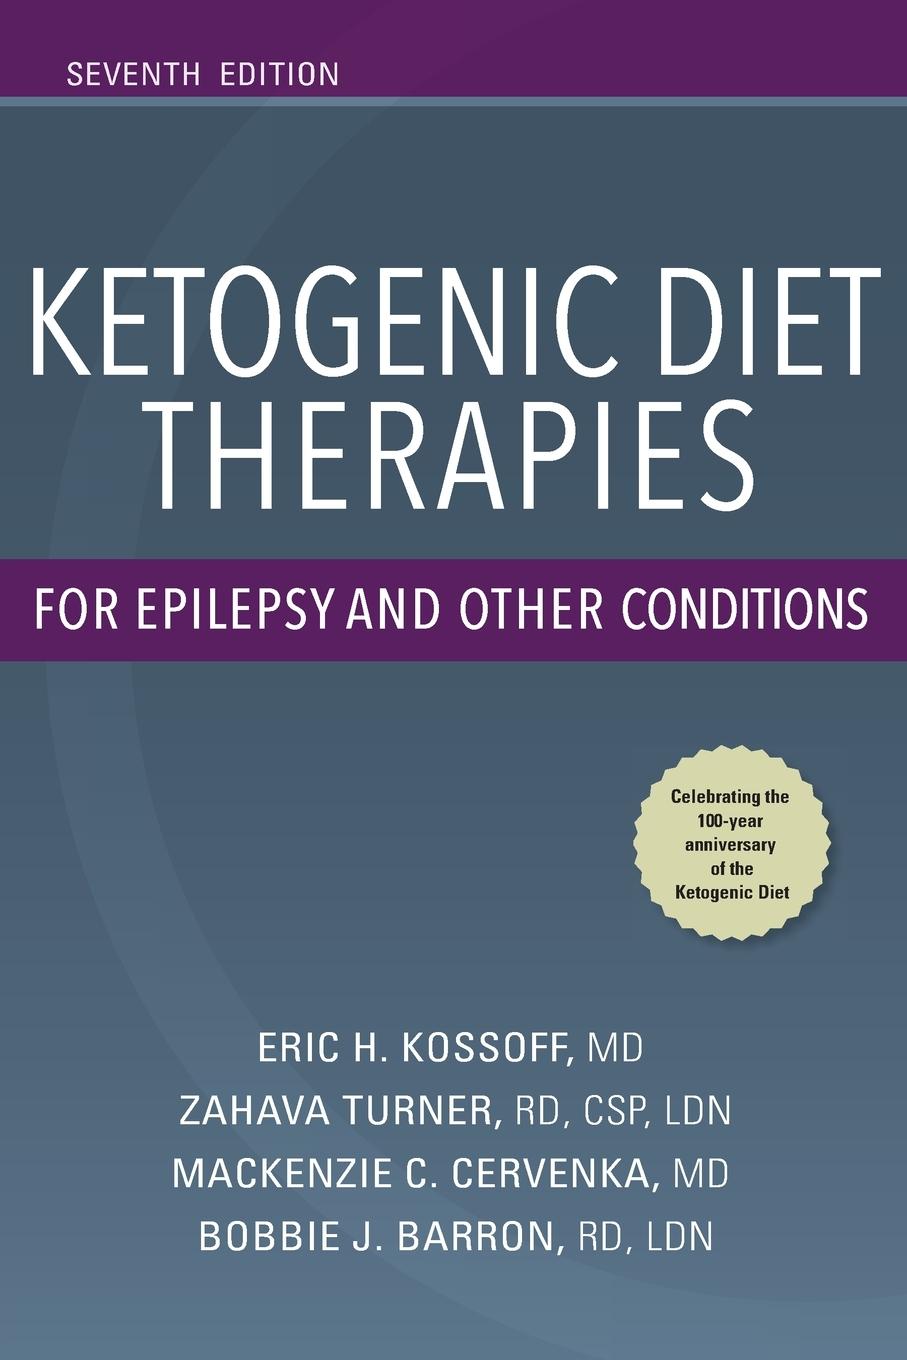 Book Ketogenic Diet Therapies for Epilepsy and Other Conditions Eric H. Kossoff